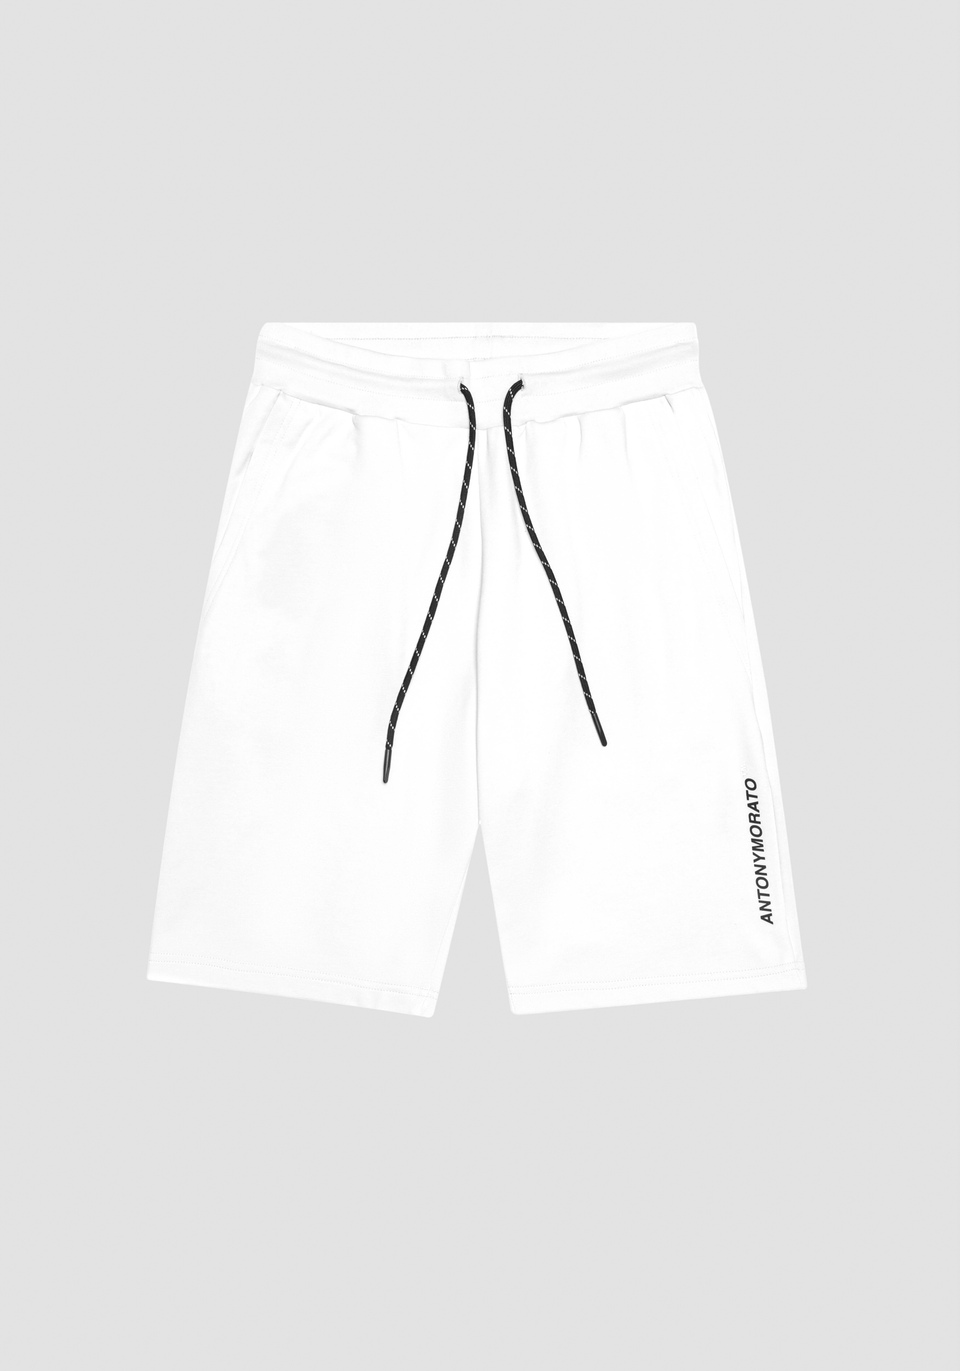 REGULAR FIT SHORTS IN COTTON BLEND AND SUSTAINABLE POLYESTER - Antony Morato Online Shop